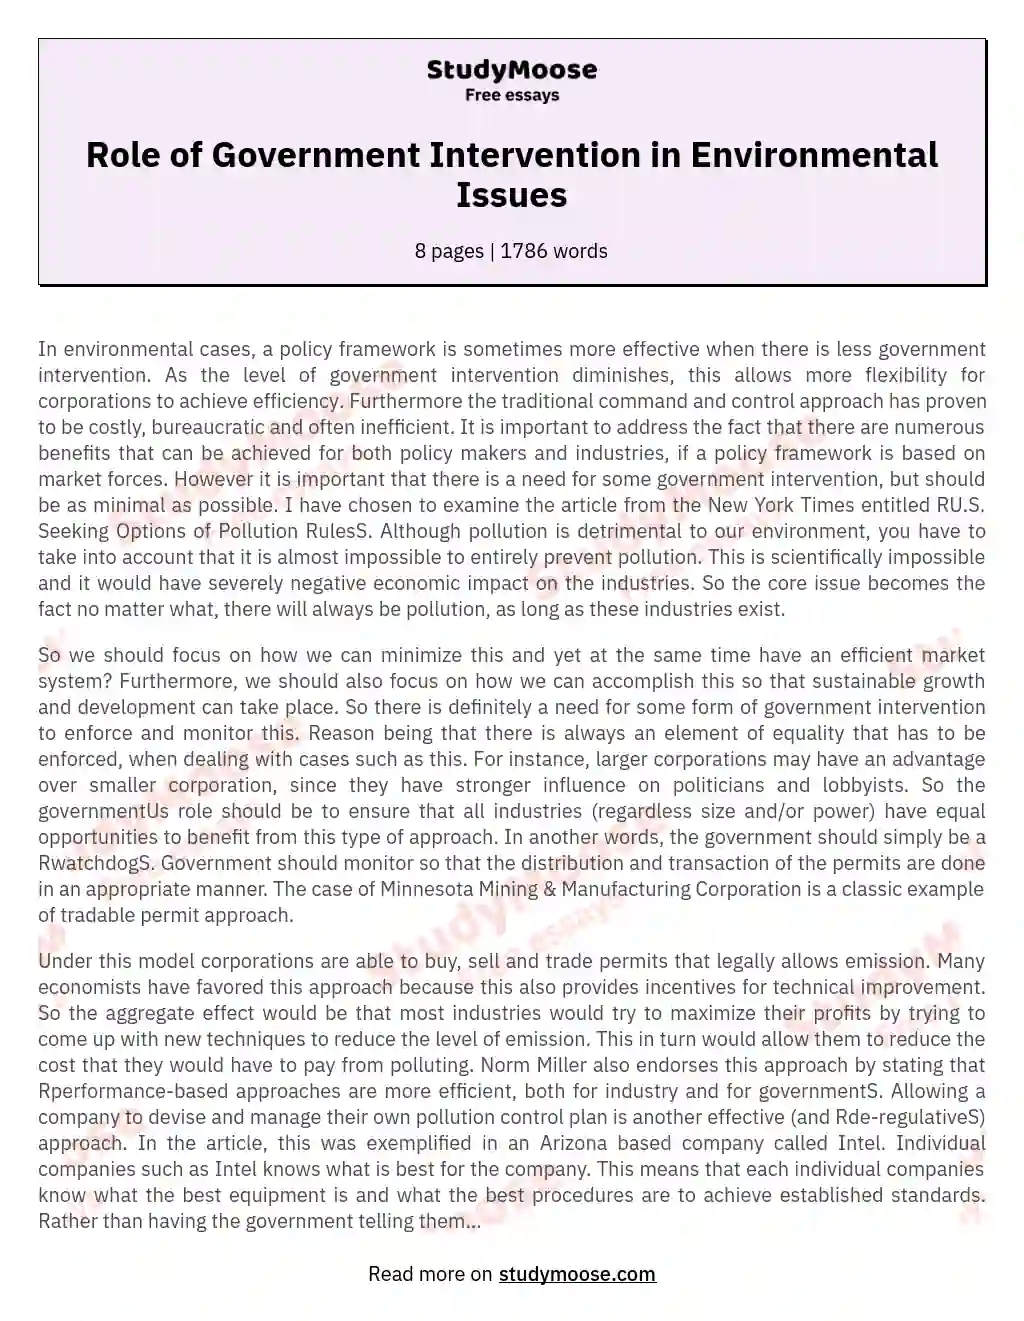 Role of Government Intervention in Environmental Issues